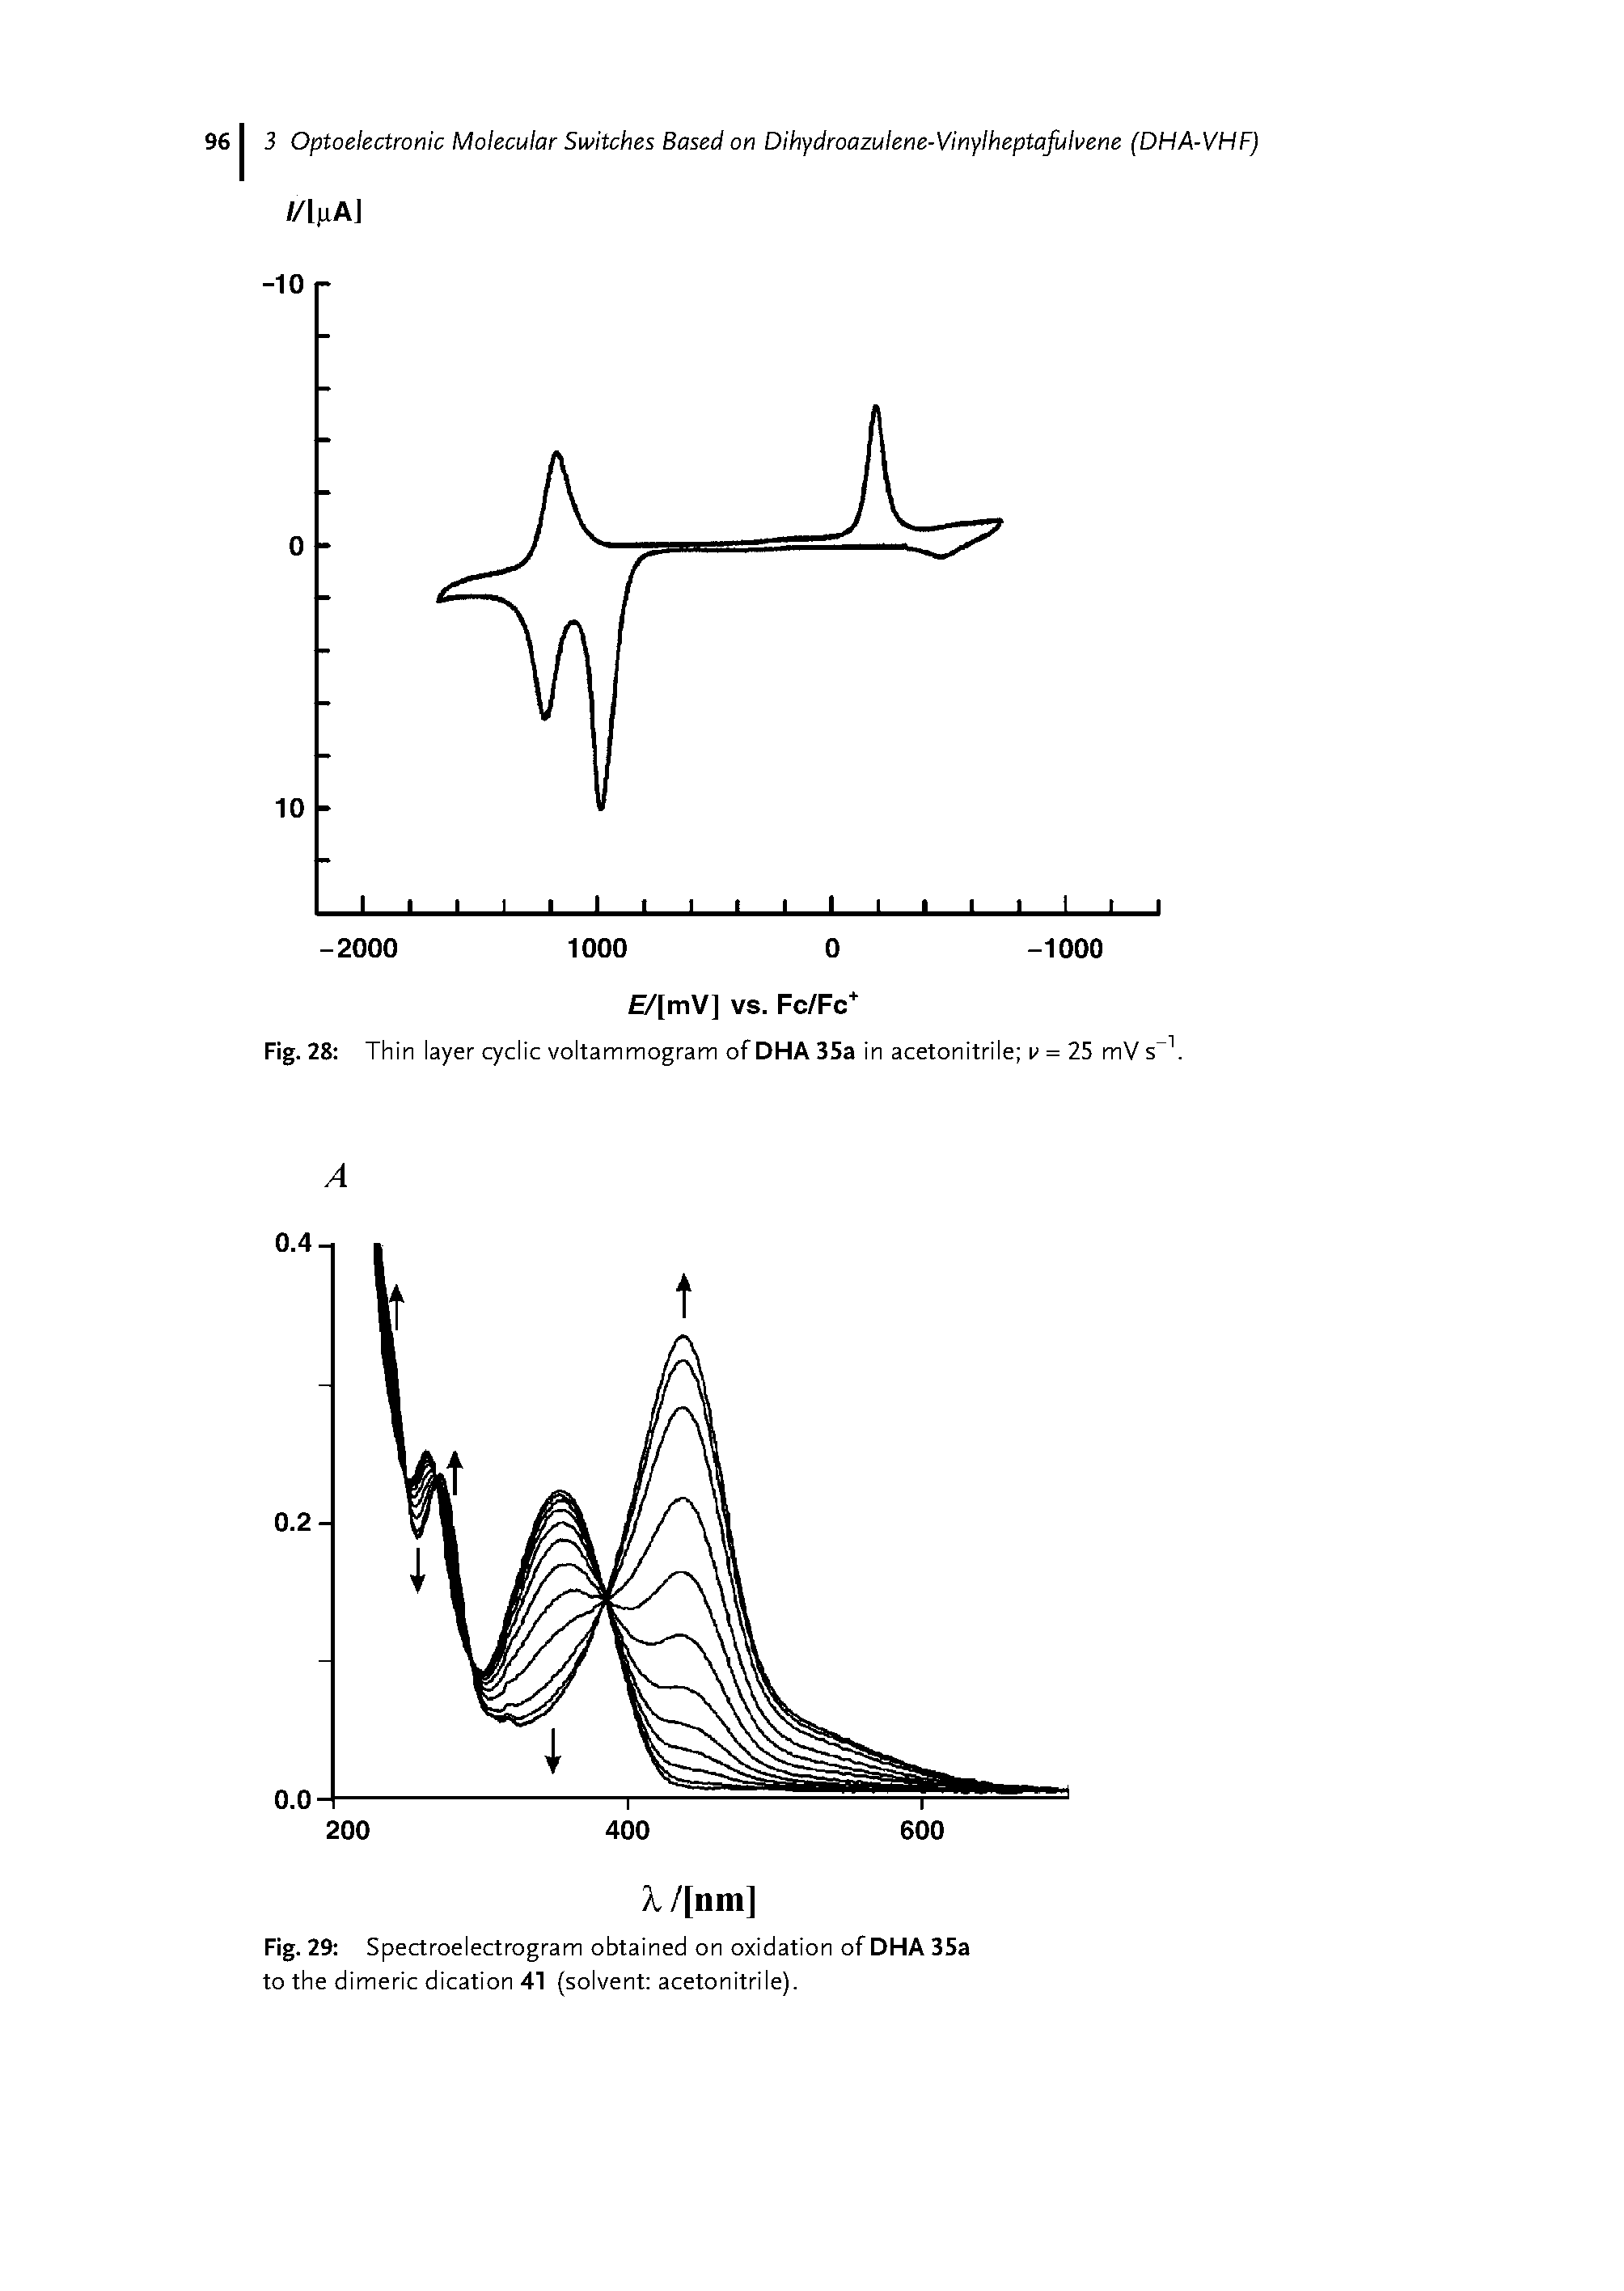 Fig. 29 Spectroelectrogram obtained on oxidation of DHA 35a to the dimeric dication 41 (solvent acetonitrile).